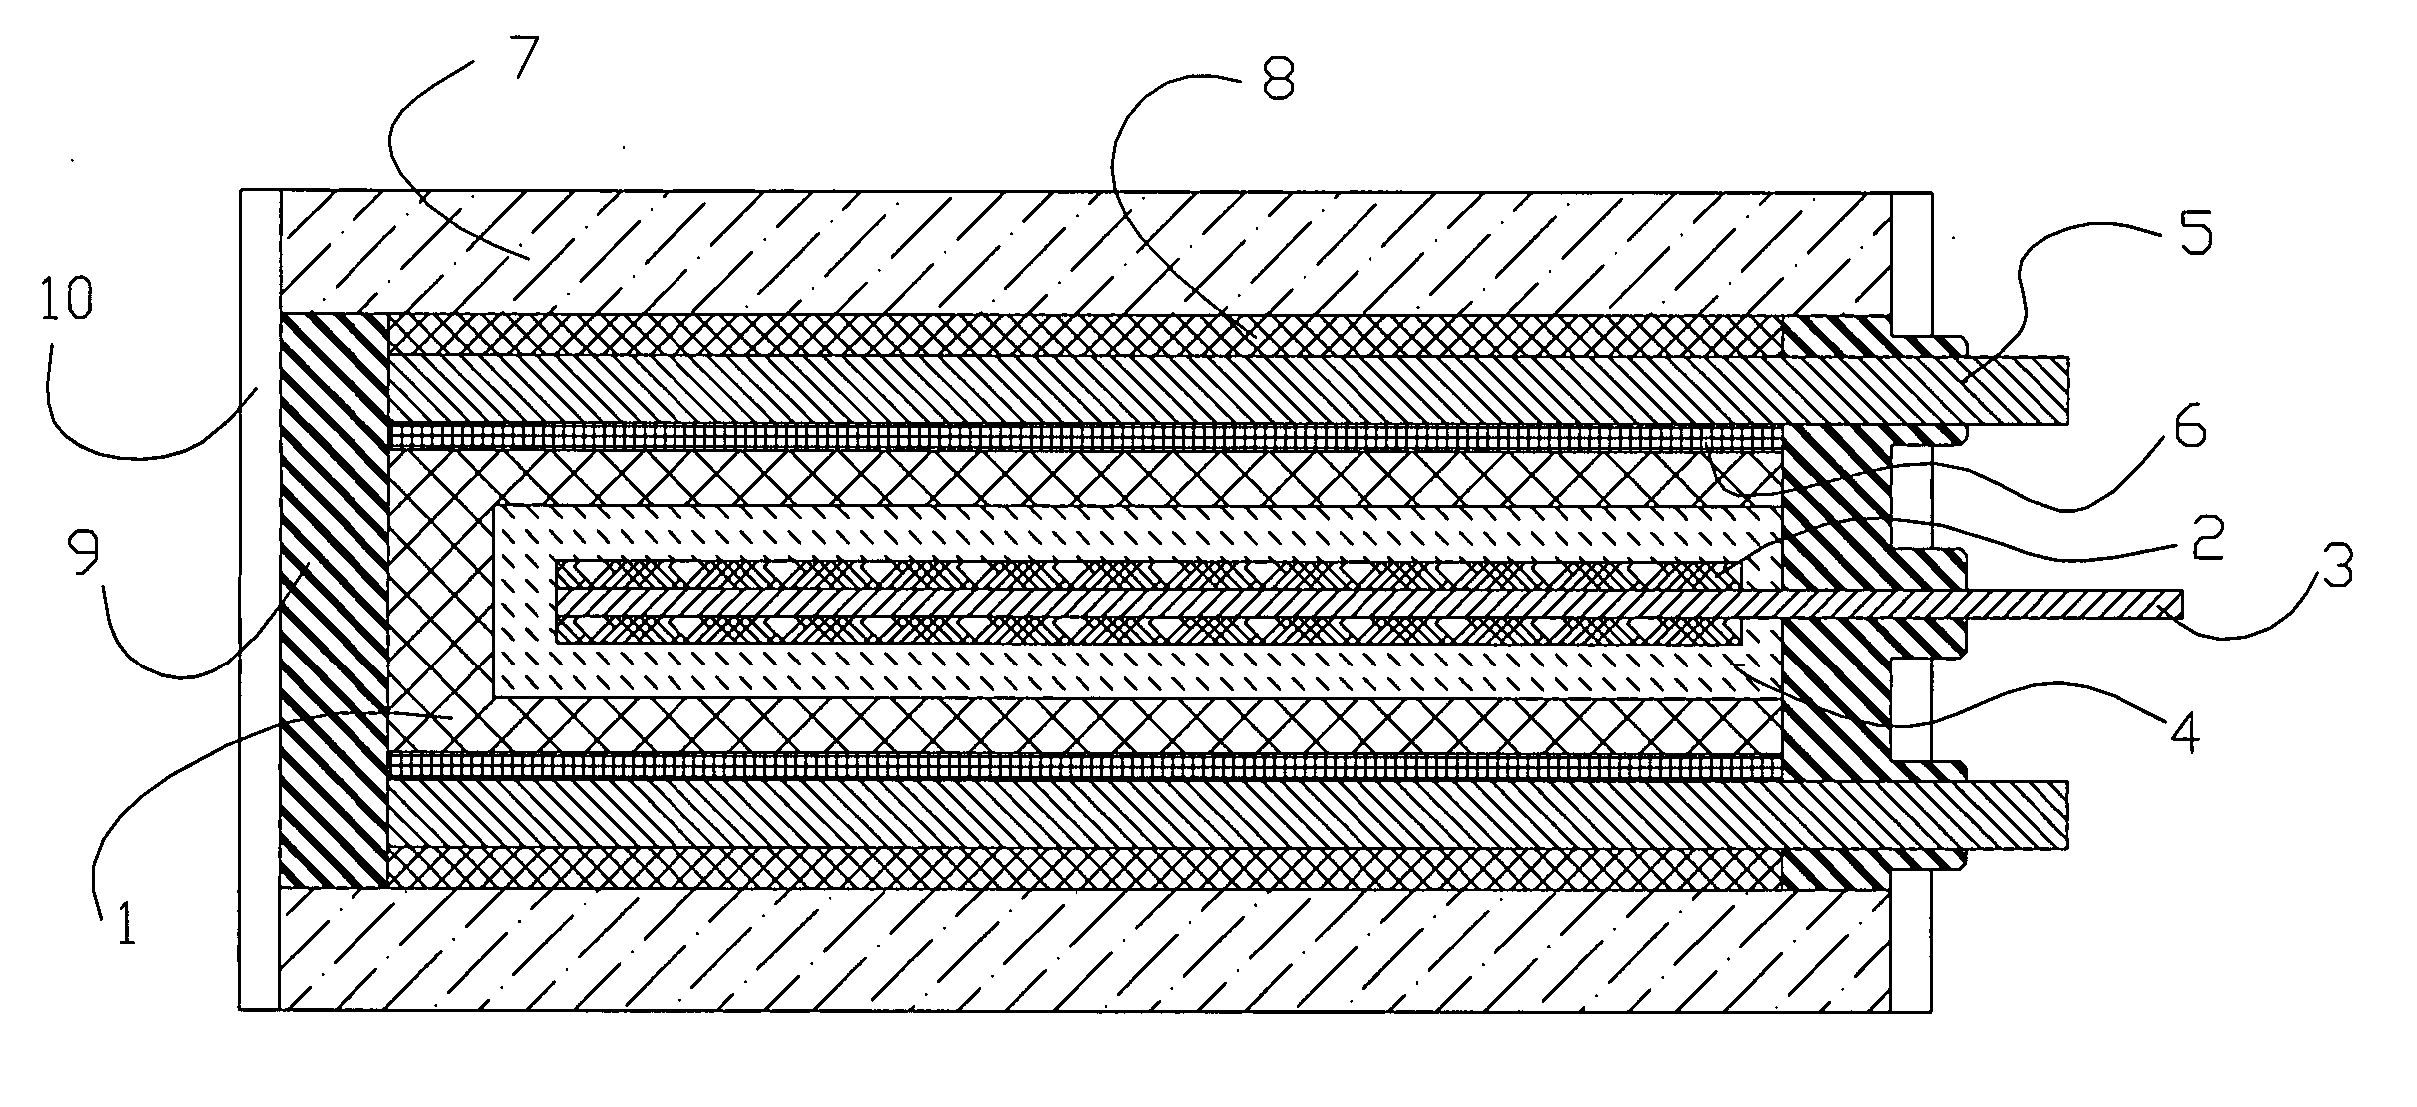 Positive electrode of an Electric Double Layer capacitor